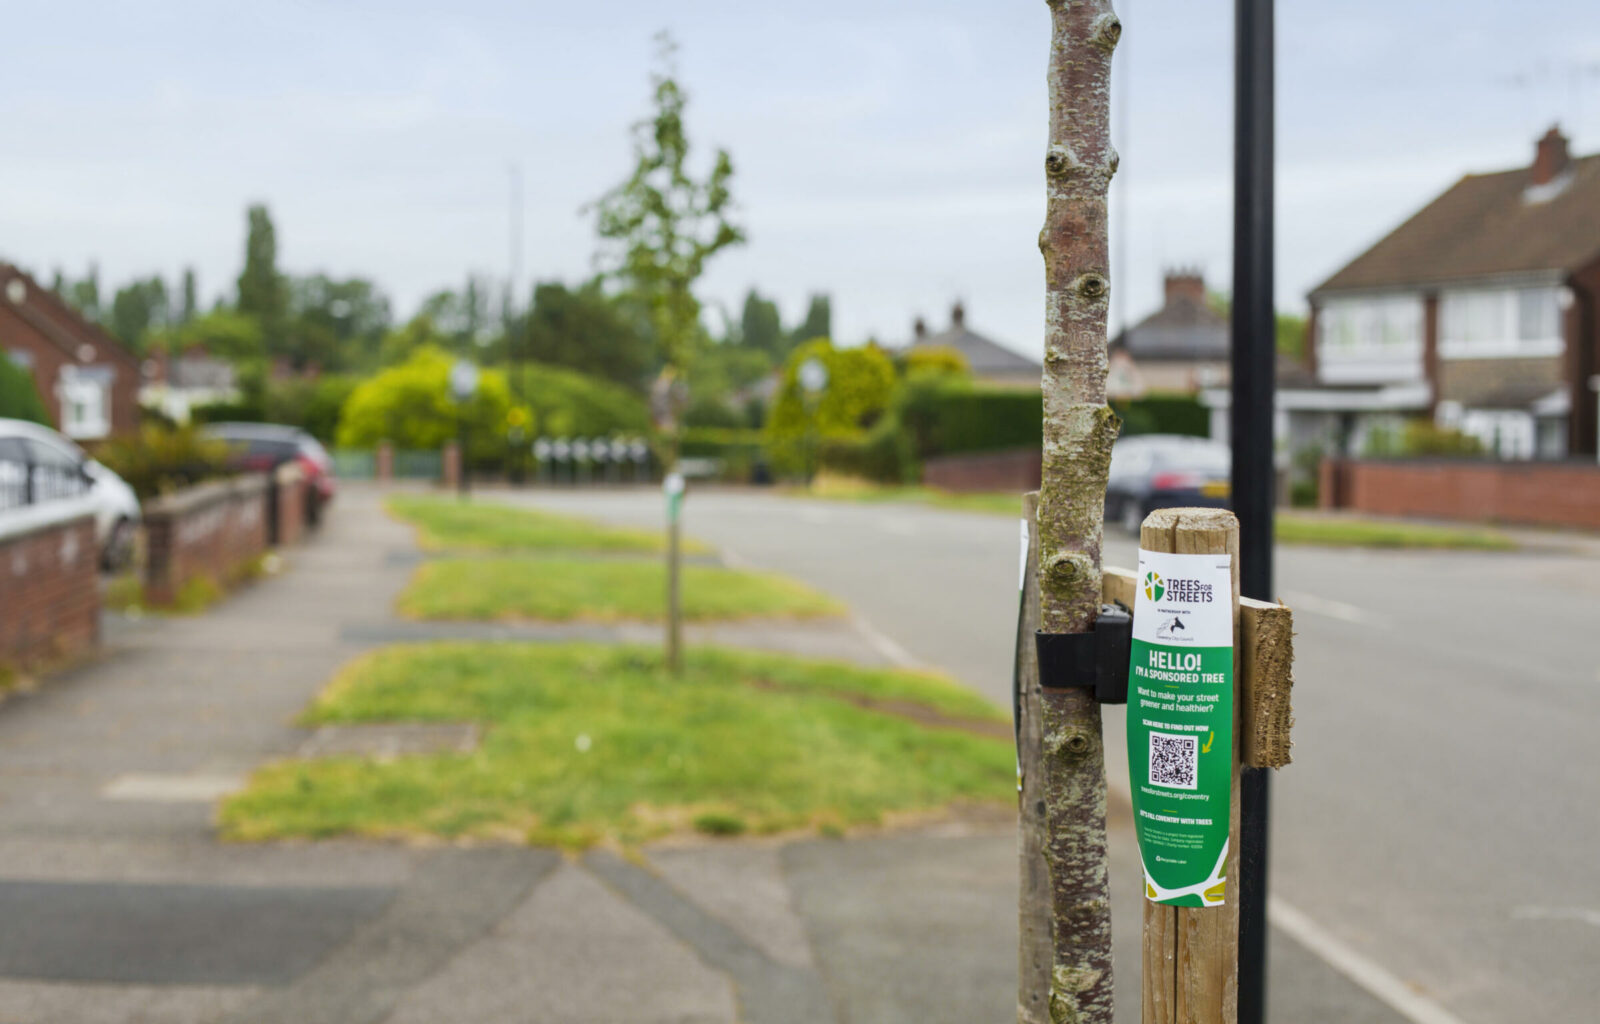 A Trees for Streets label on two sponsored street trees in Coventry